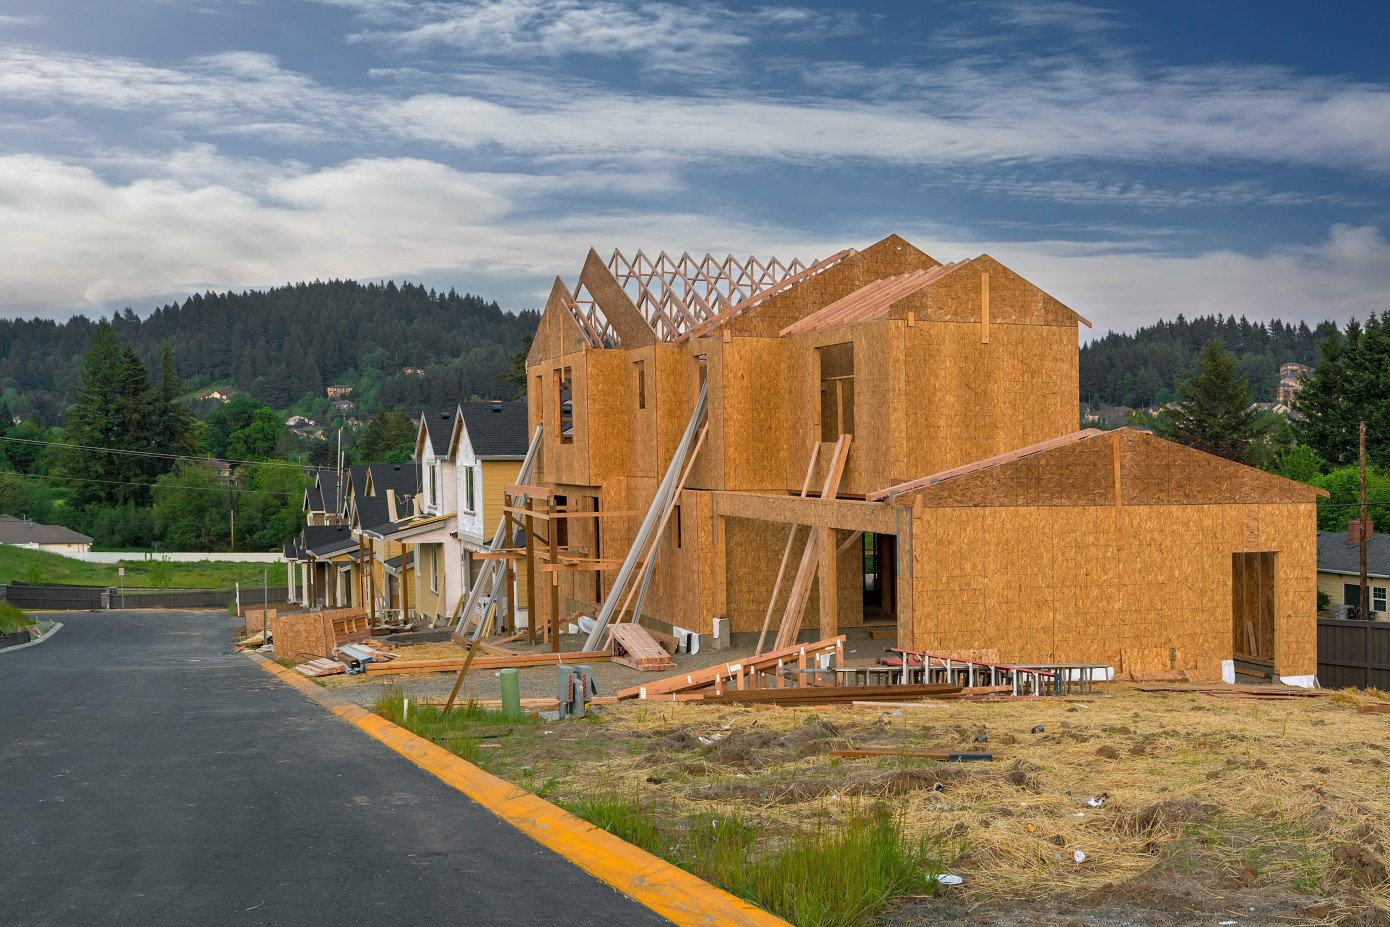 Builder confidence surges in May due to limited inventory